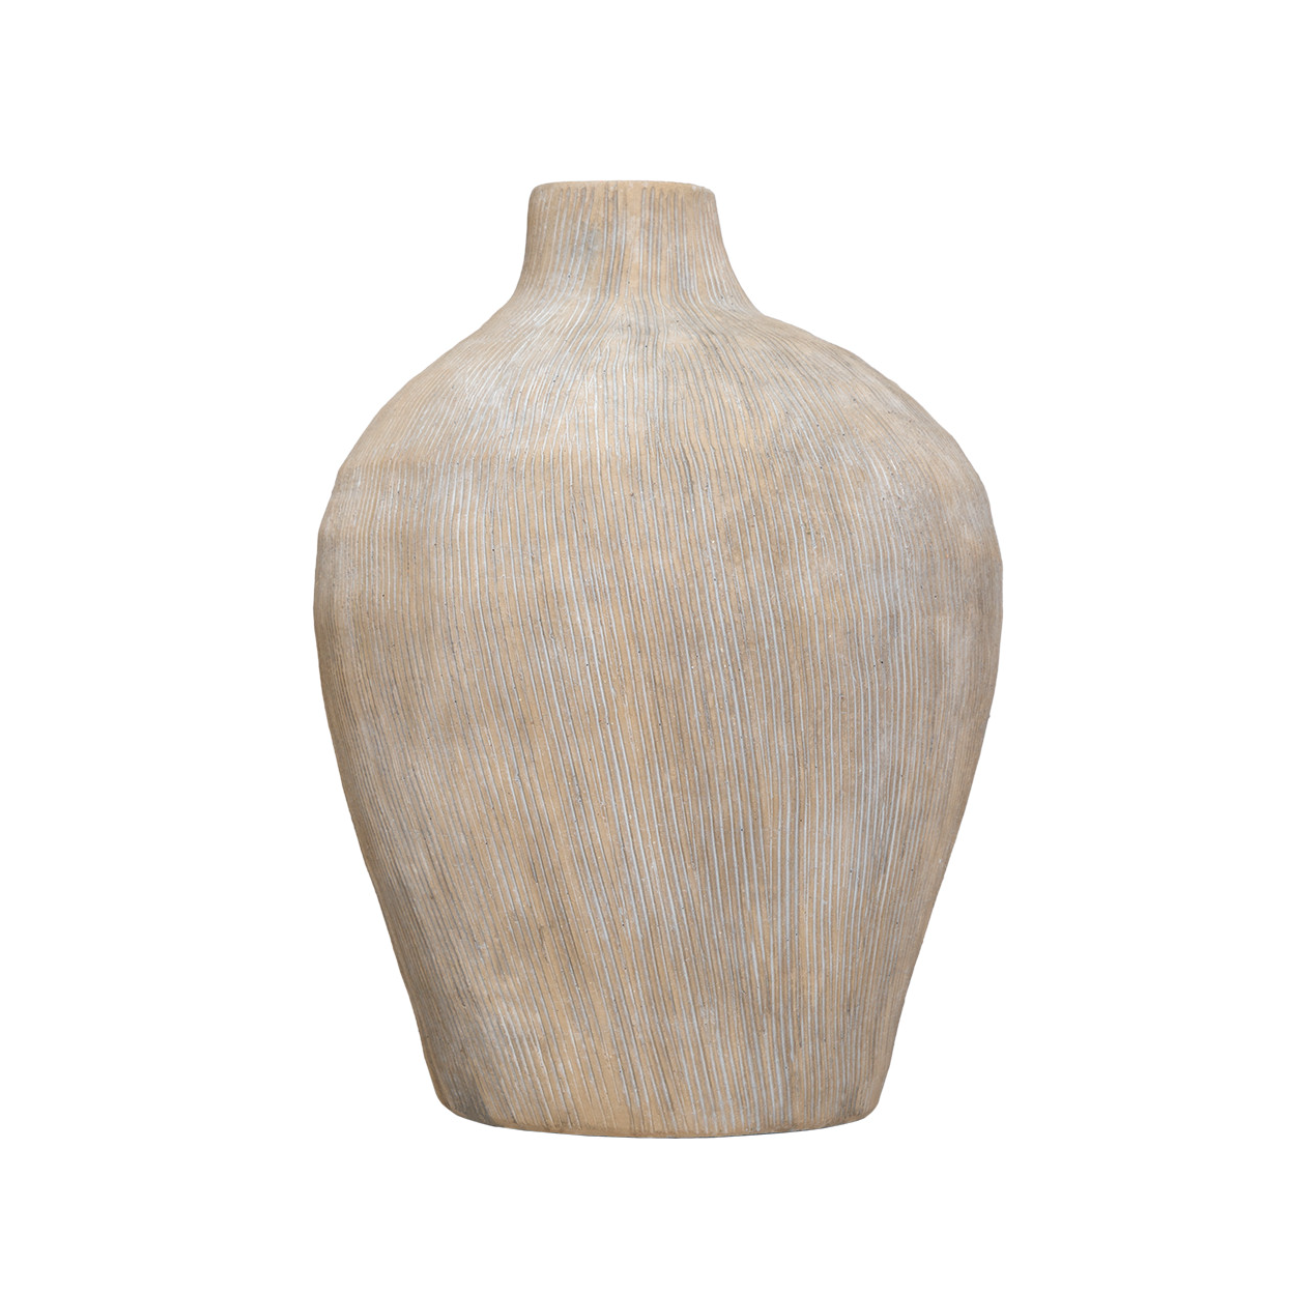 A Micah Vase from The Import Collection, with a natural, beige color and vertical ridges, inspired by Scottsdale Arizona aesthetics, isolated on a white background.